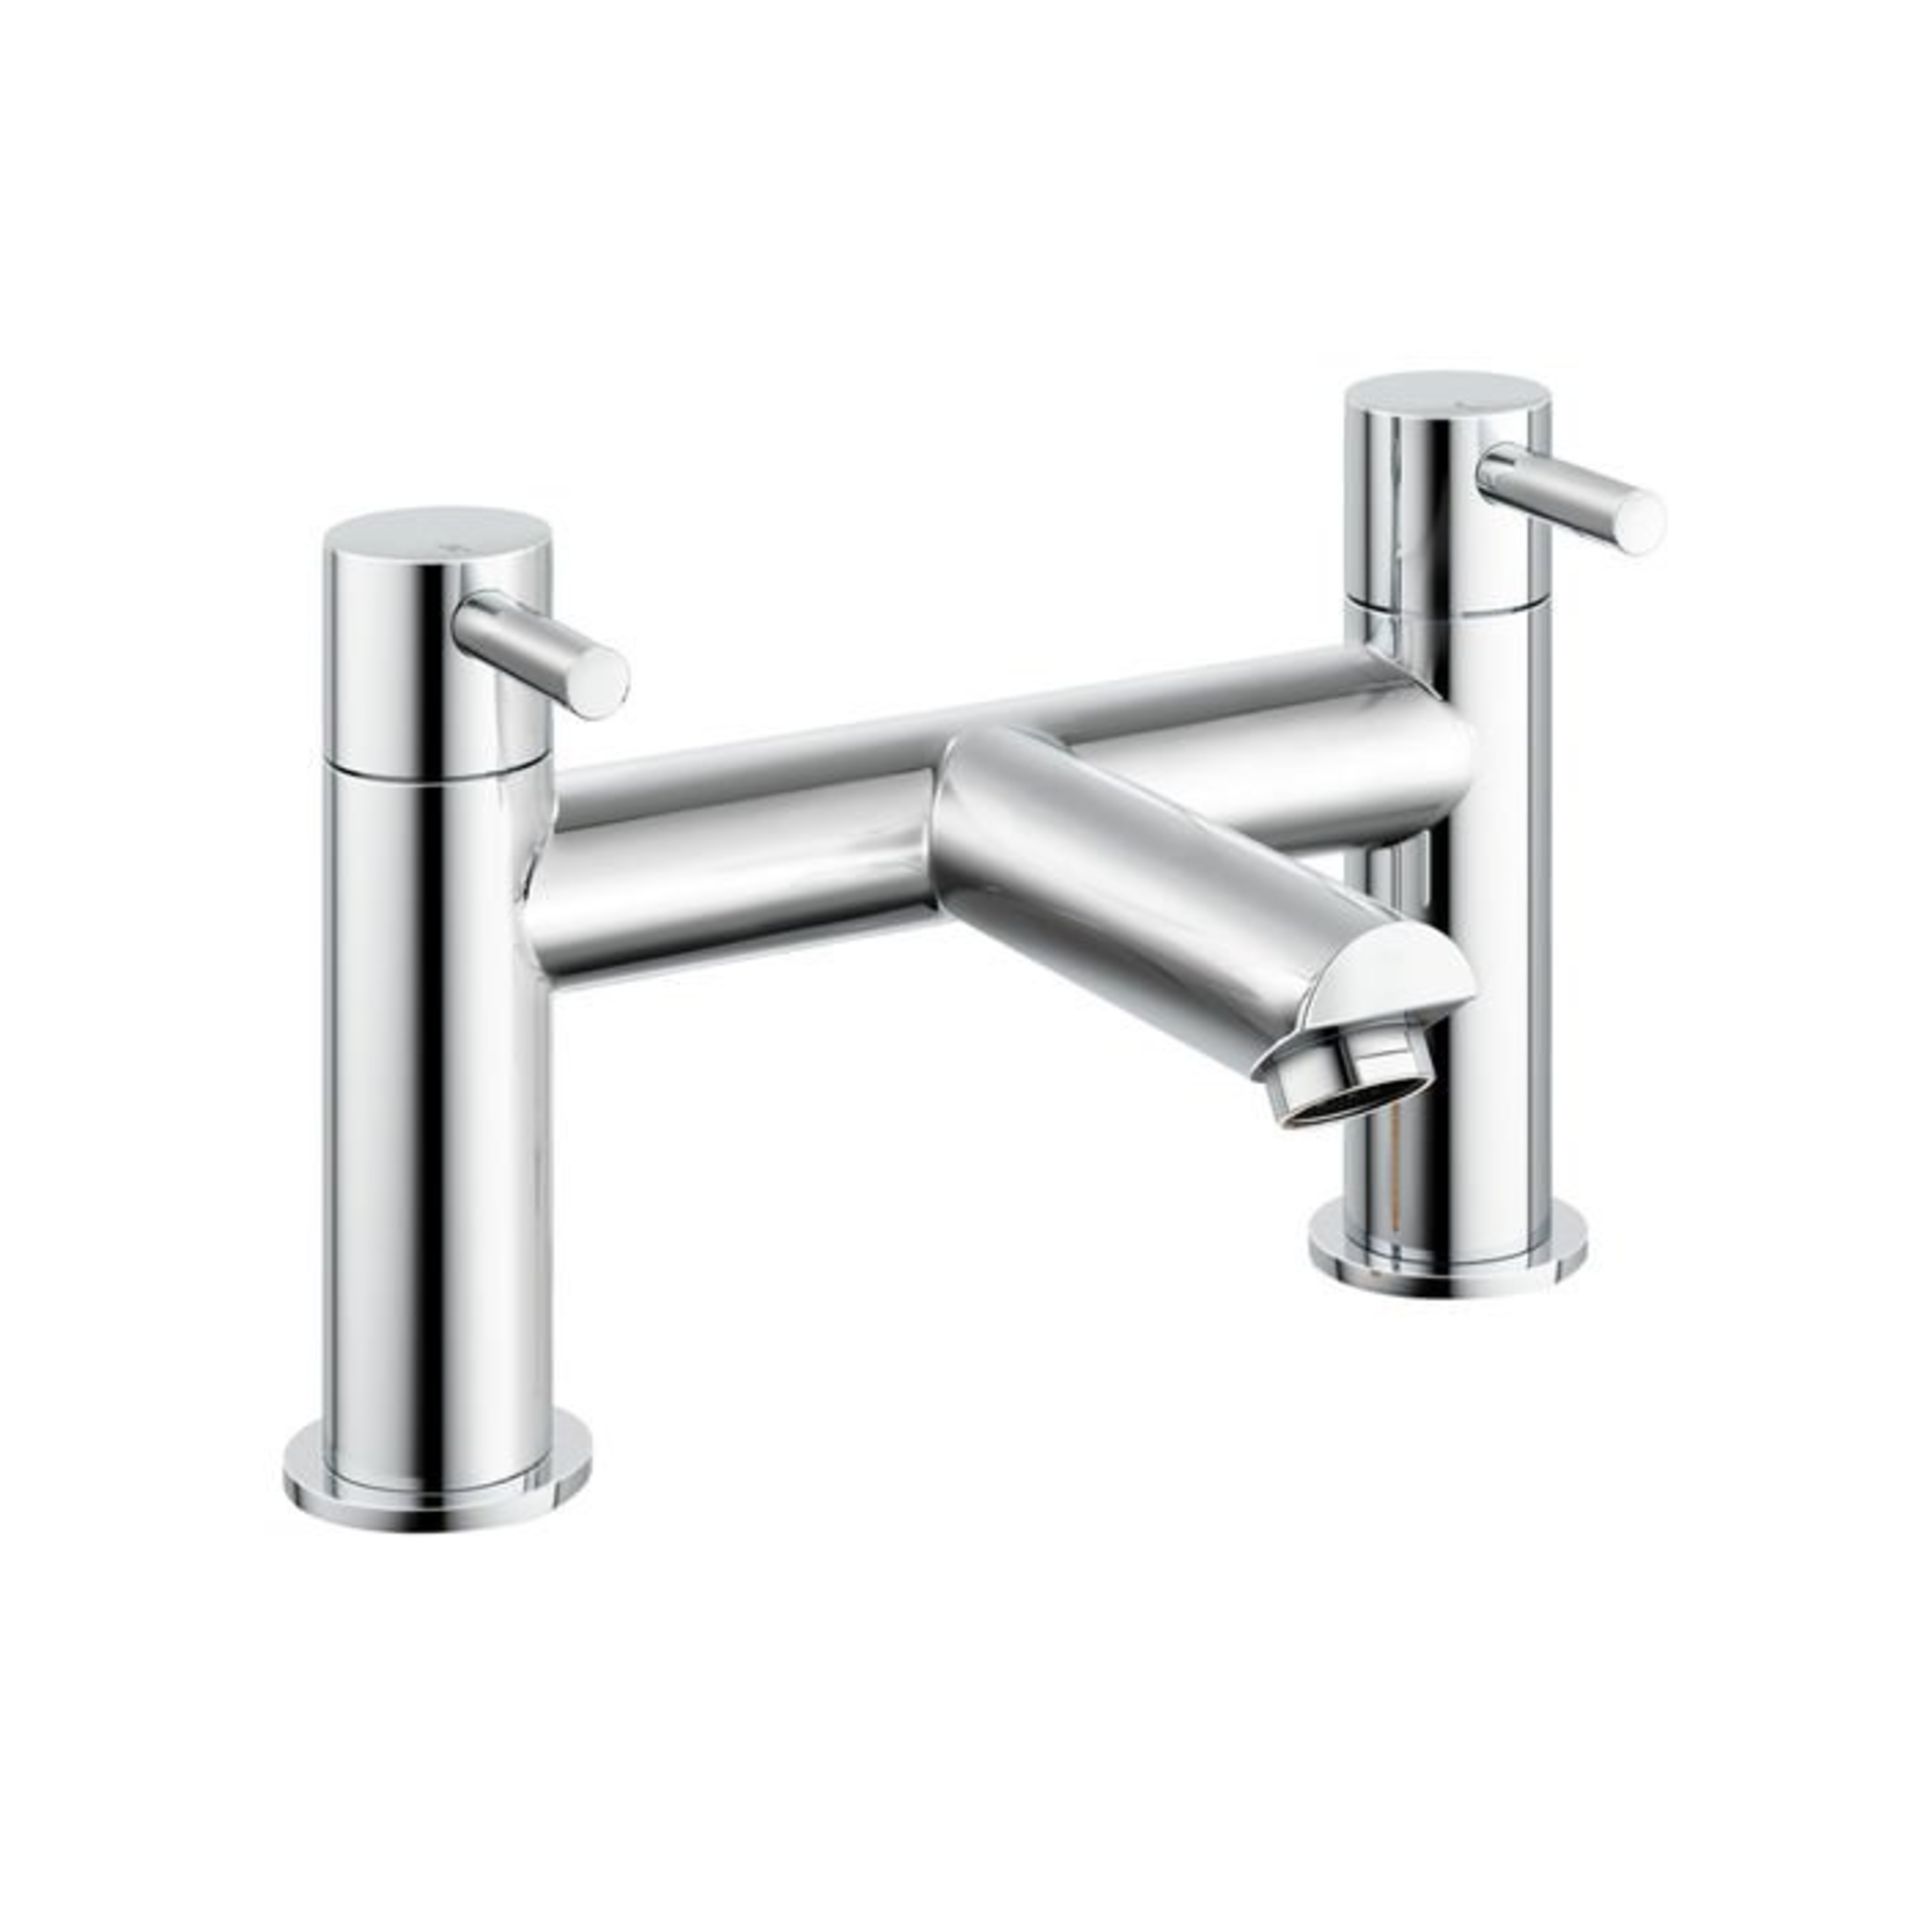 (S93) Gladstone II Bath Filler Mixer Tap Chrome Plated Solid Brass 1/4 turn solid brass valve with - Image 2 of 2